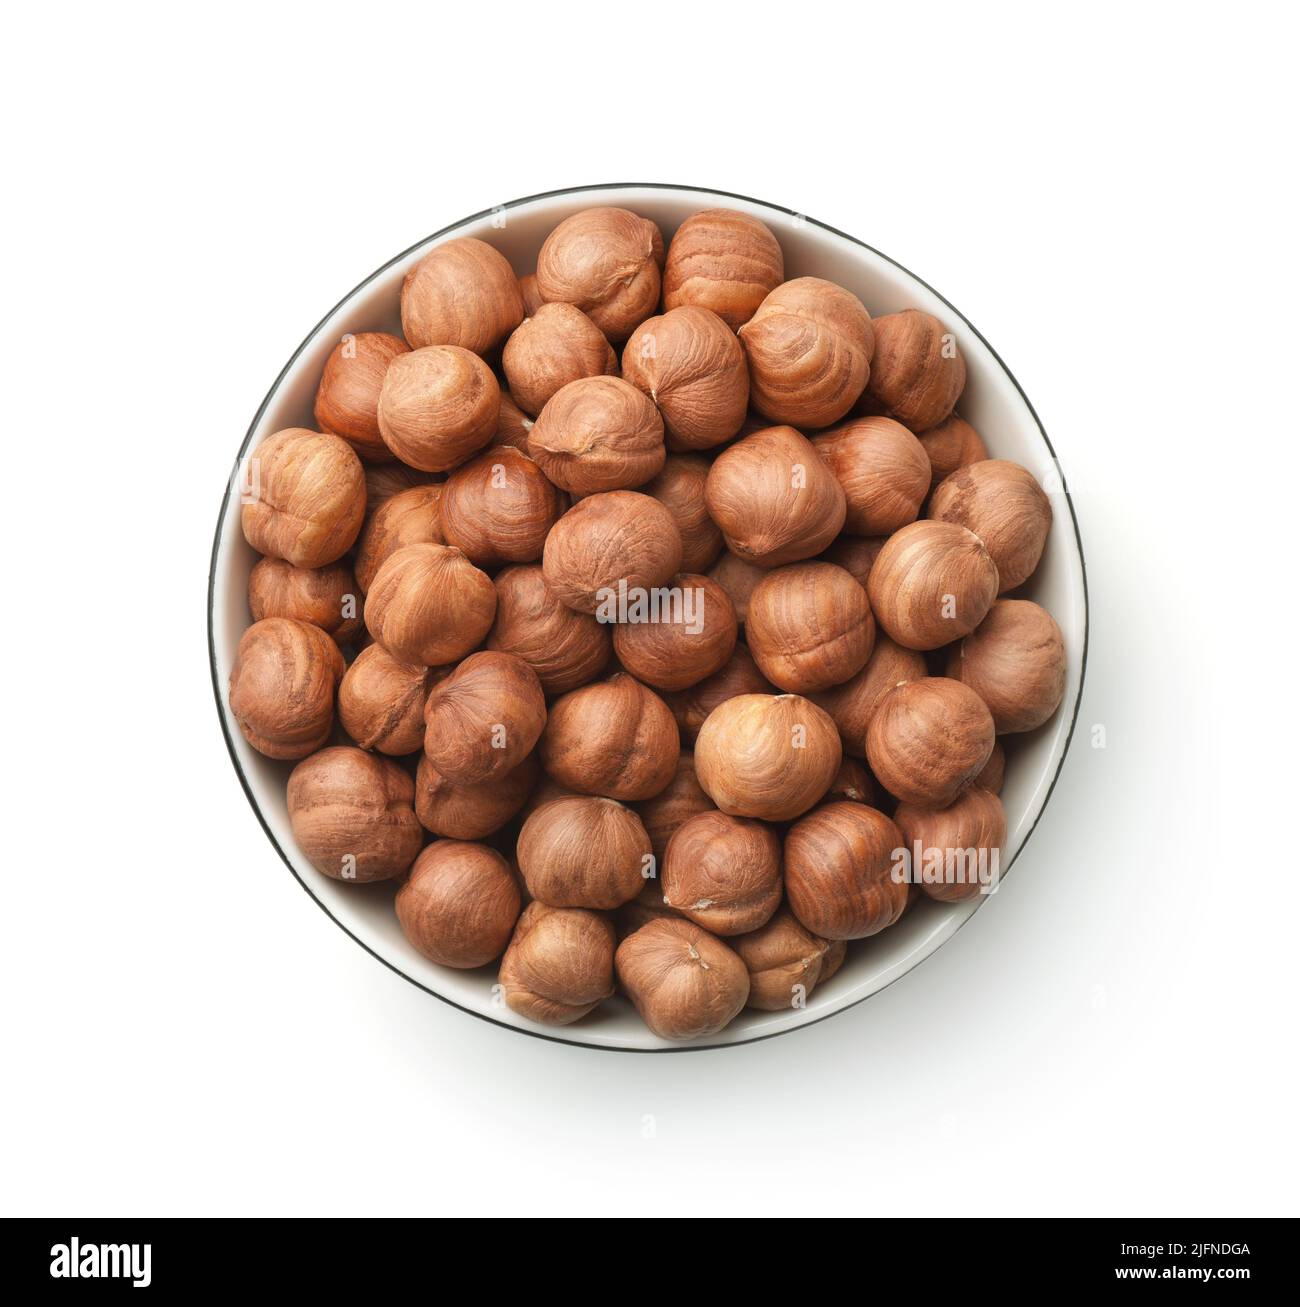 Top view of shelled hazelnut kernels in ceramic bowl isolated on white Stock Photo